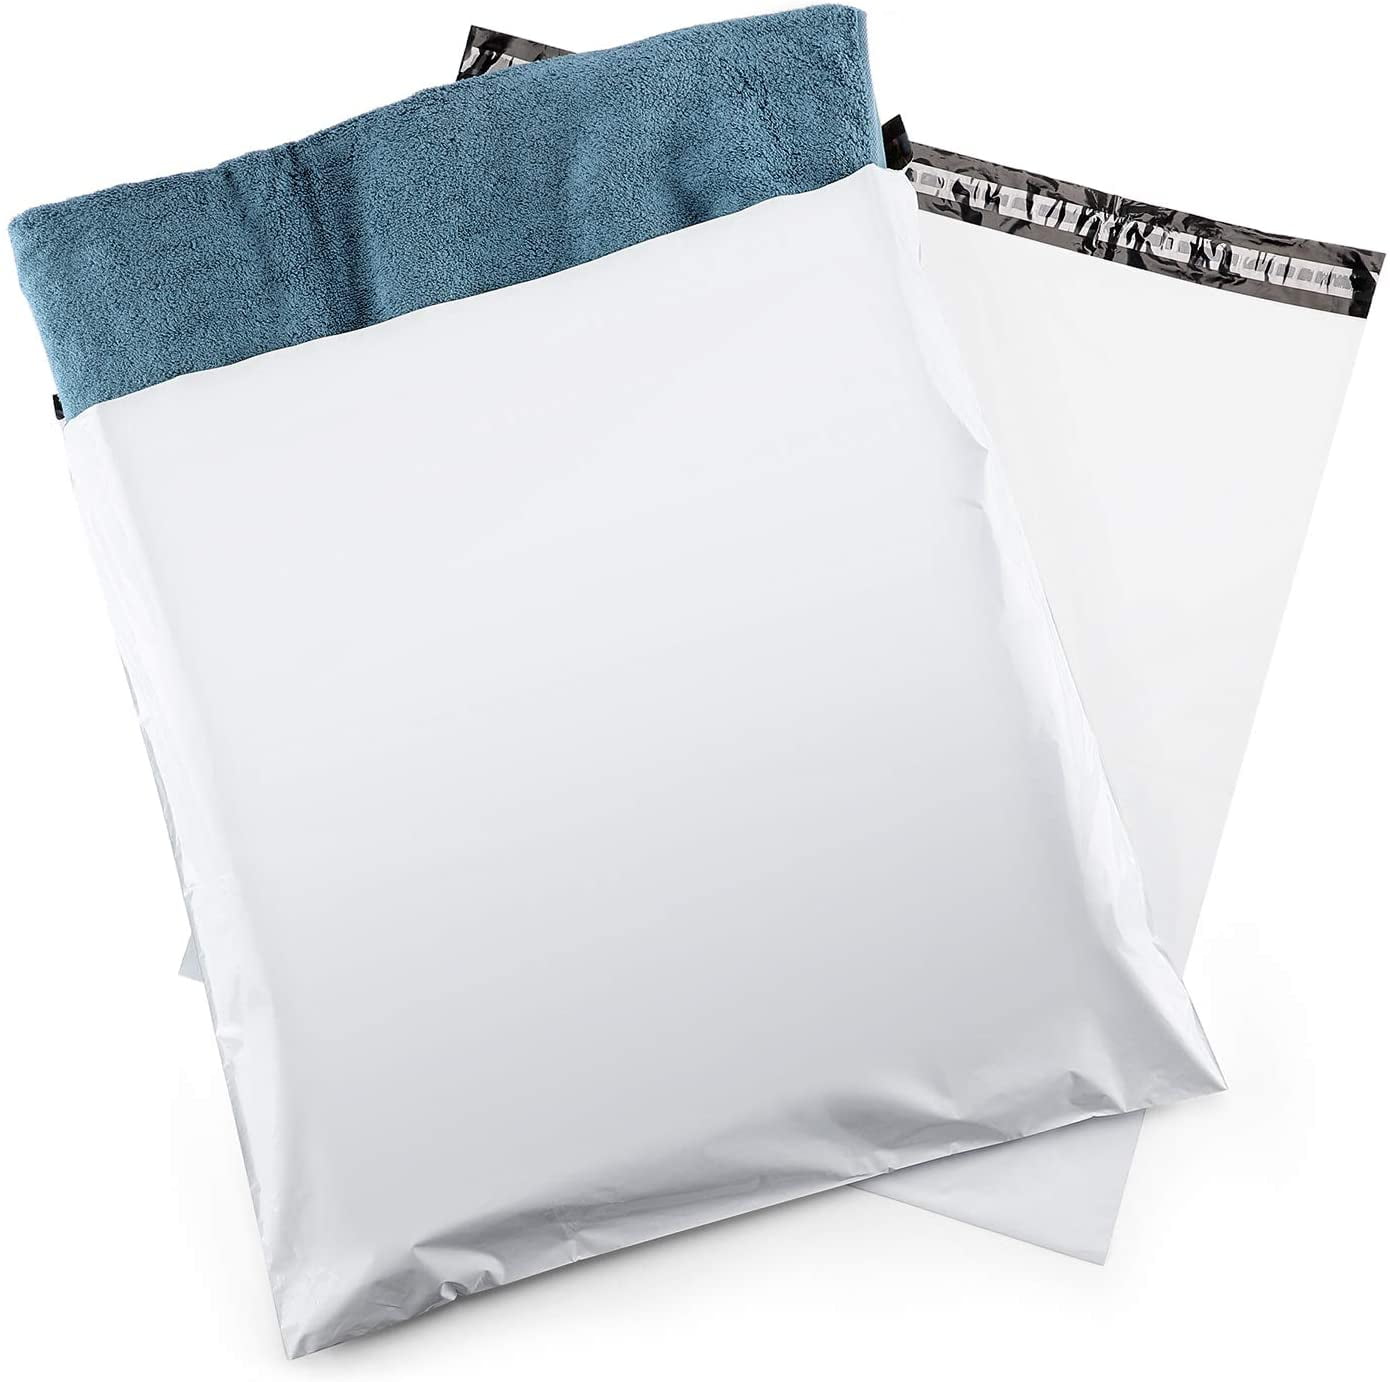 ANY QUANTITY WATERPROOF POLY Mail Bag QUALITYDURABLE CHEAP,ALL SIZES 